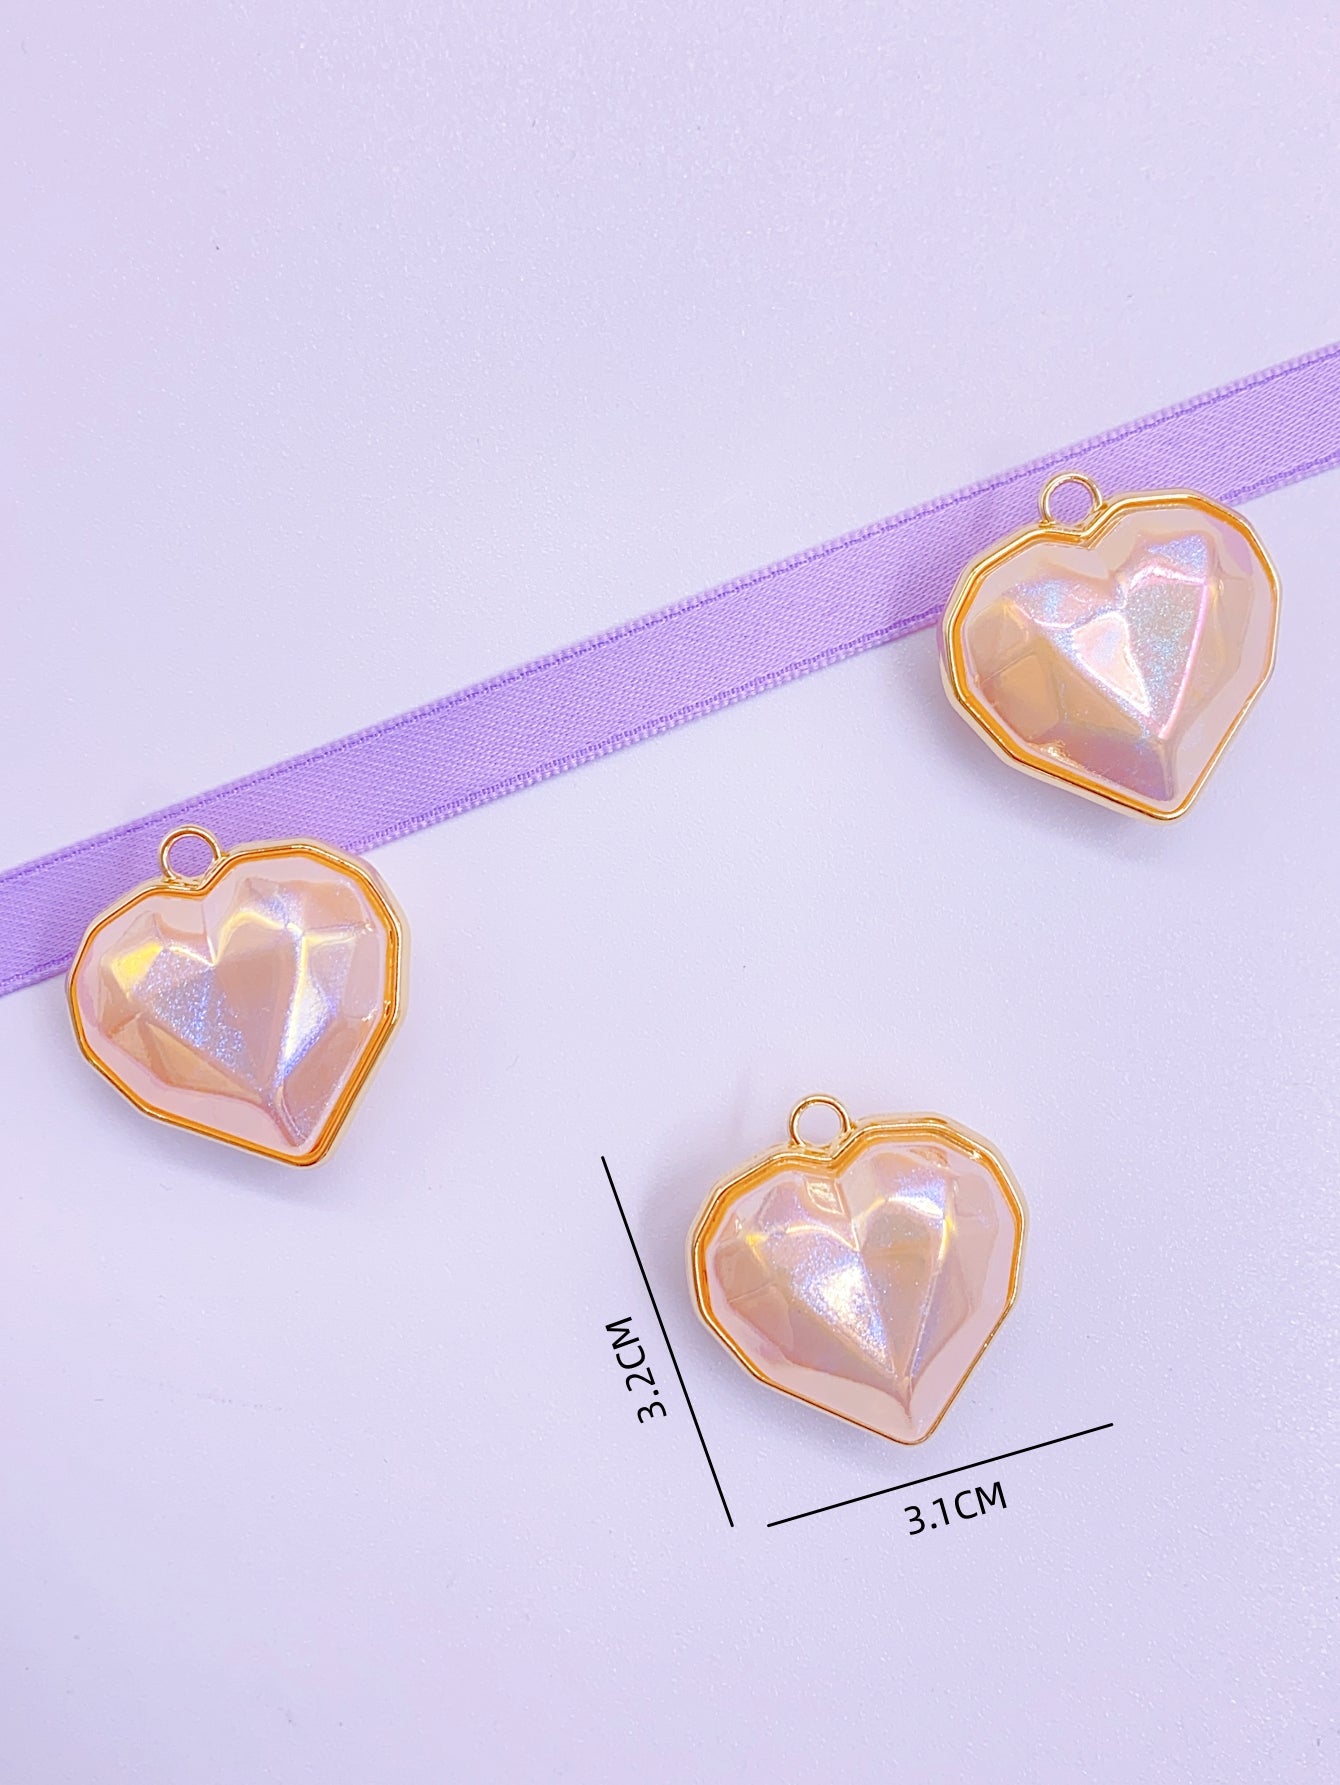 New high-grade large heart alloy hanging diy clothing necklace jewelry accessories beaded material heart crystal pendant